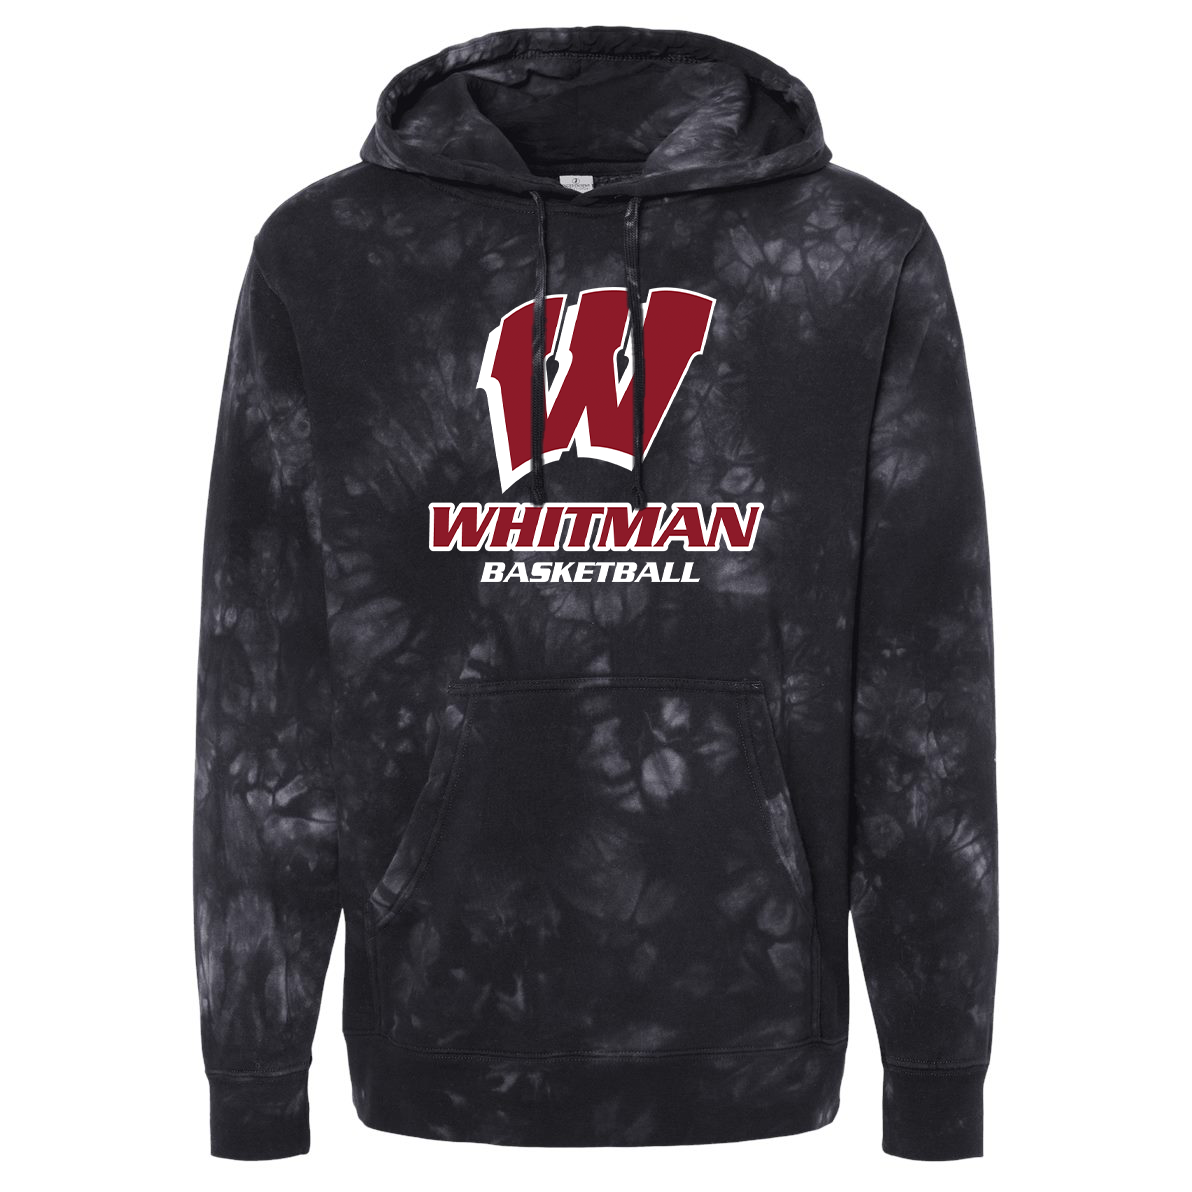 Whitman Basketball Independent Trading Co. Pigment-Dyed Hooded Sweatshirt